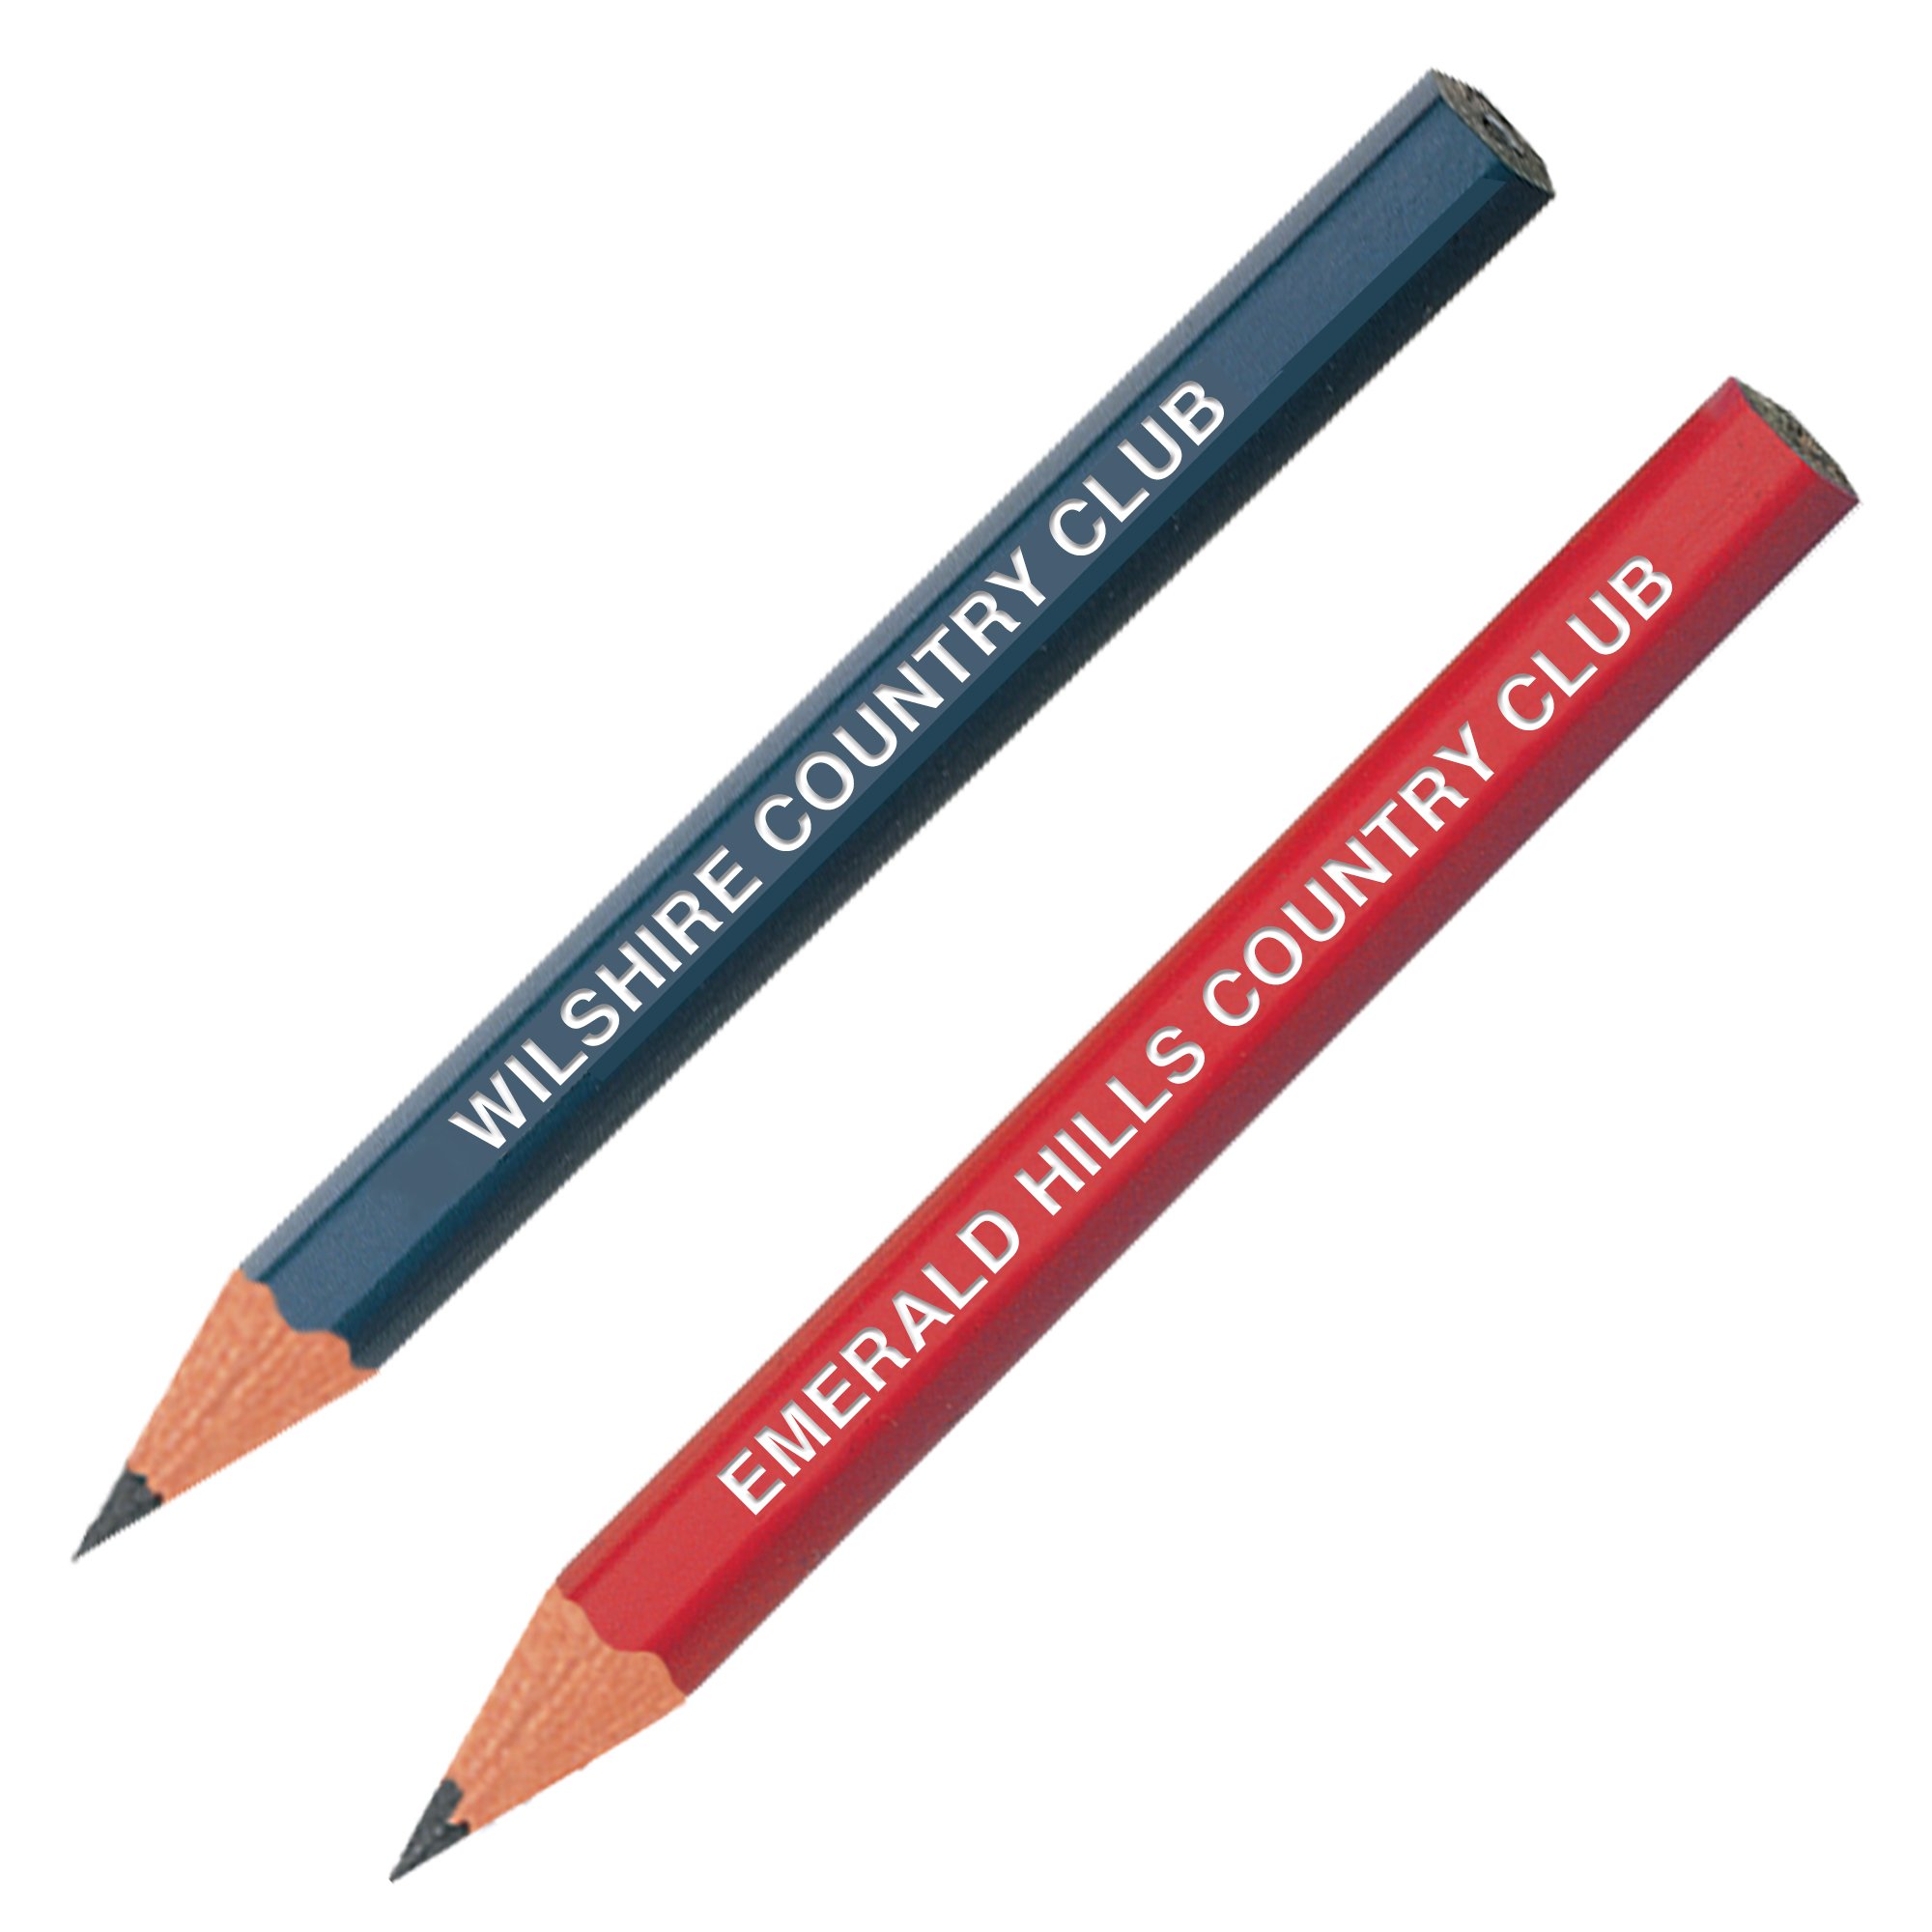 Personalized Cheap HB 3.5 inch Sharpened Wooden Golf Pencils